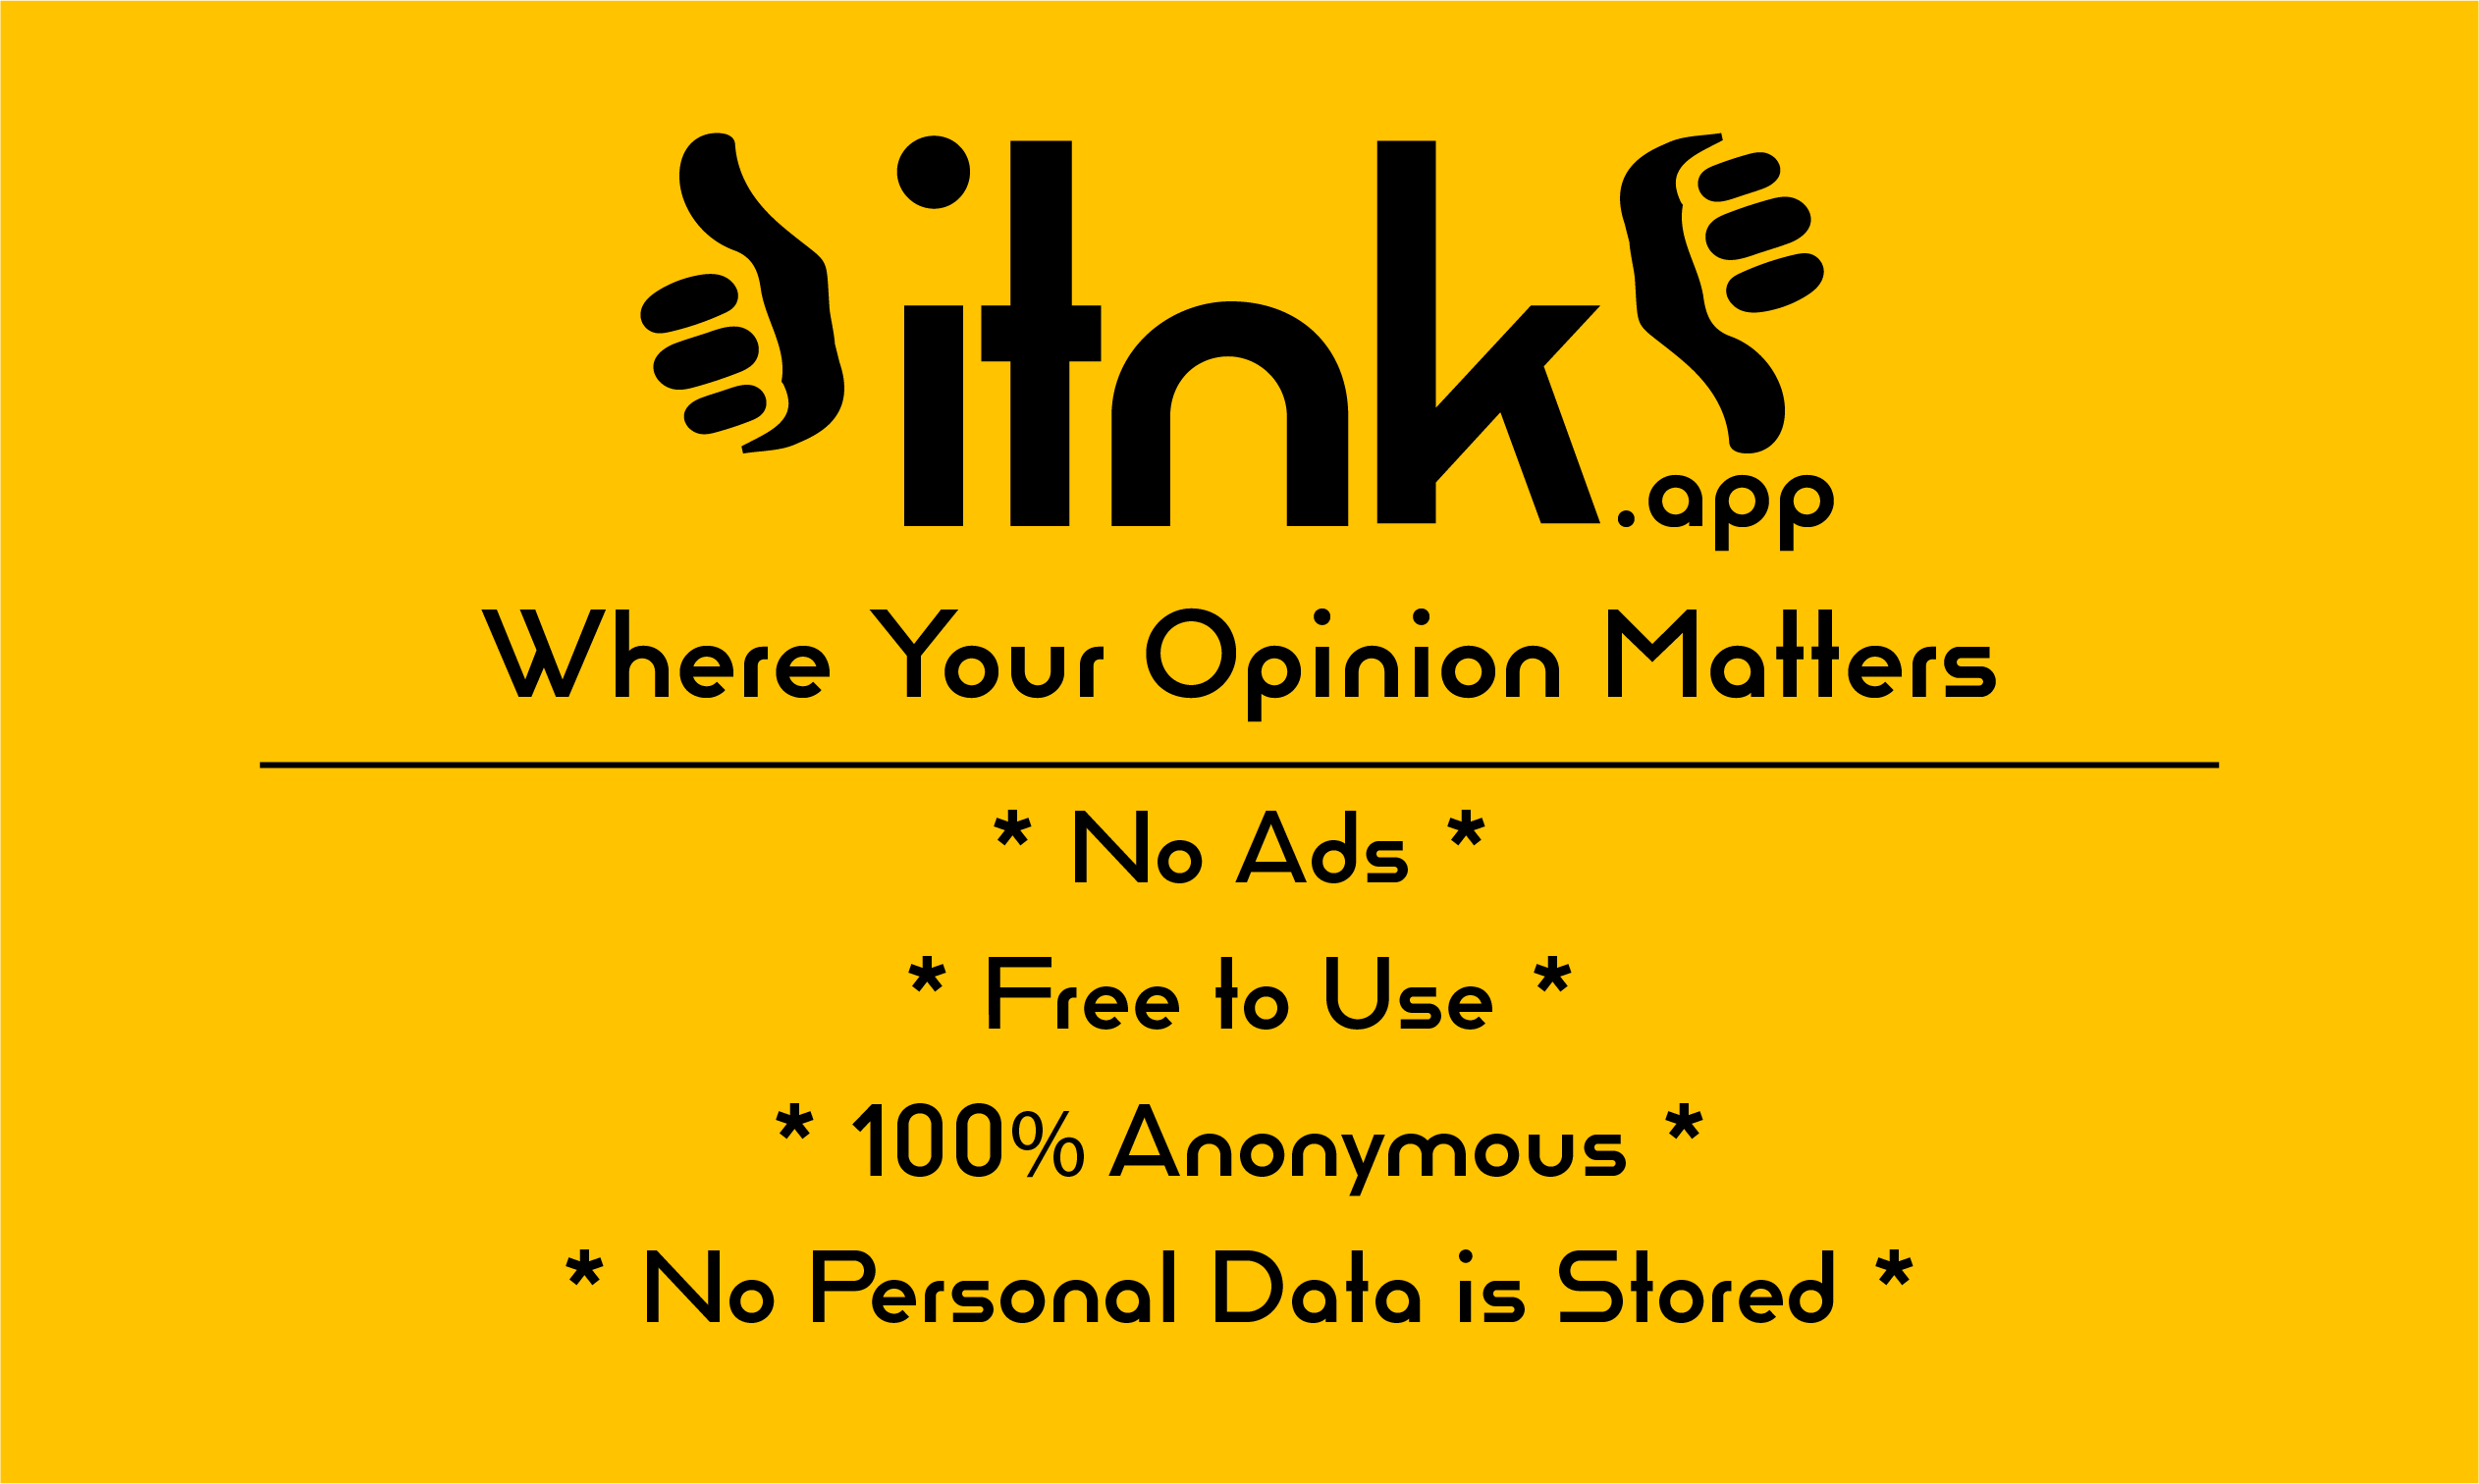 itnk-app - Fully secure opinion sharing platform